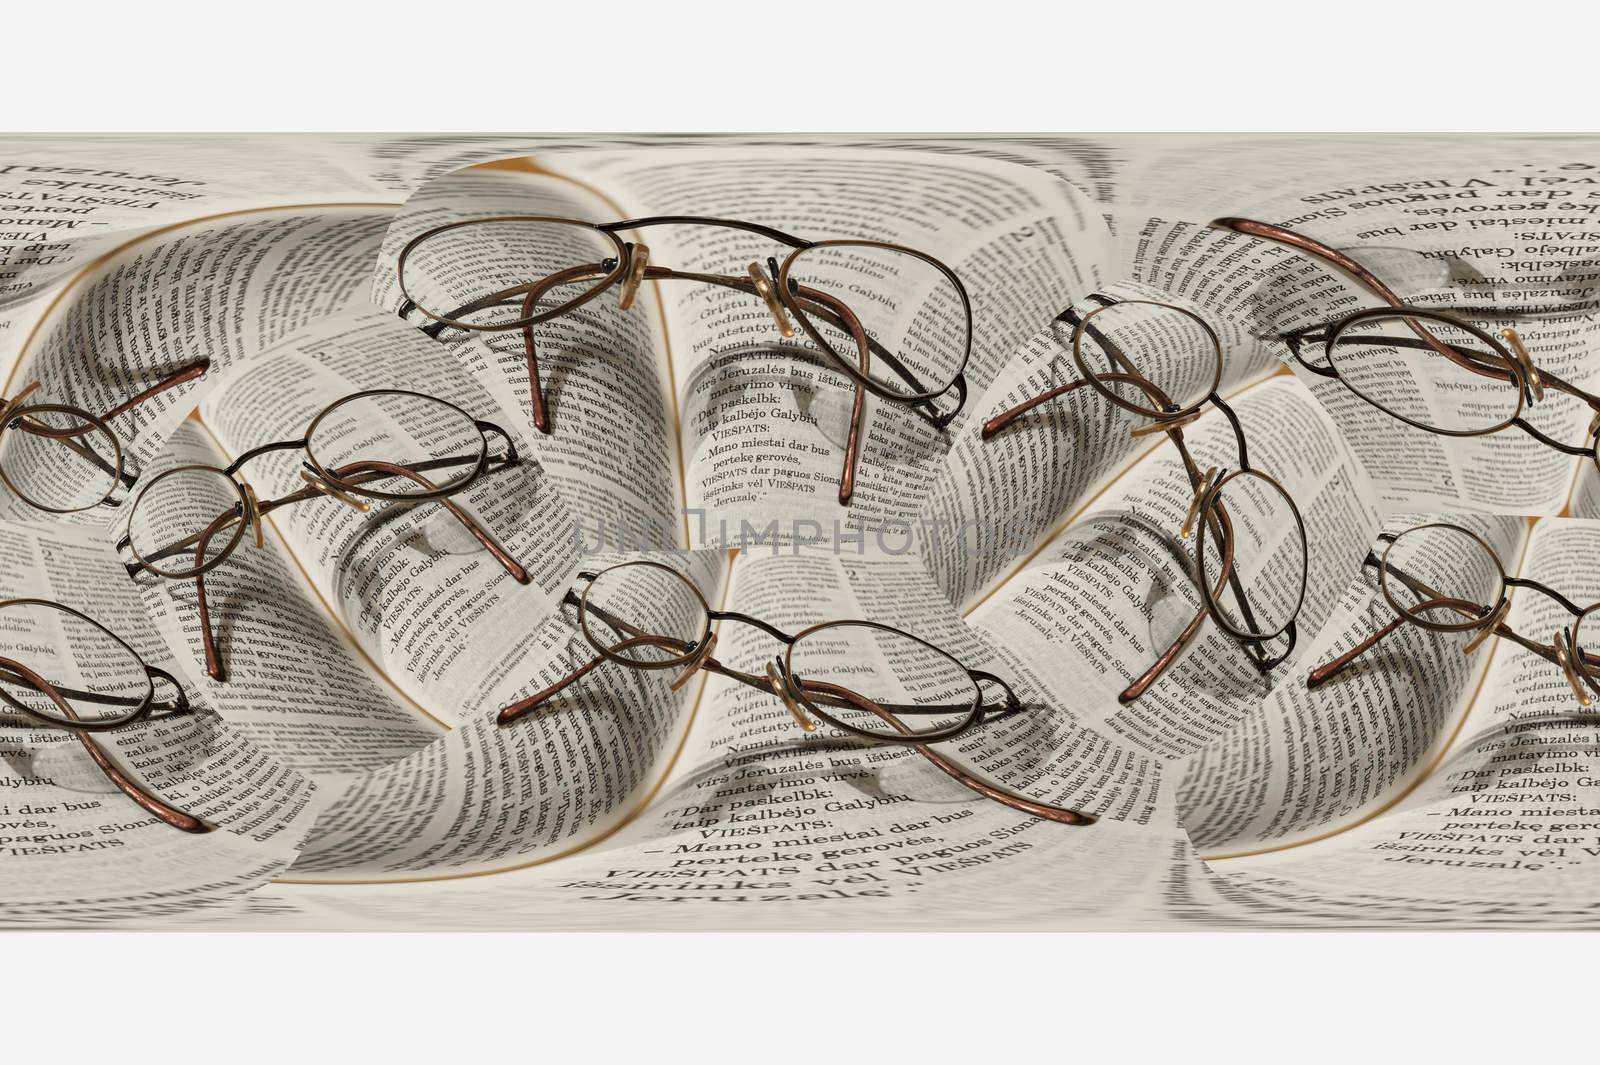 Round glasses lie on the bible in the Swedish language